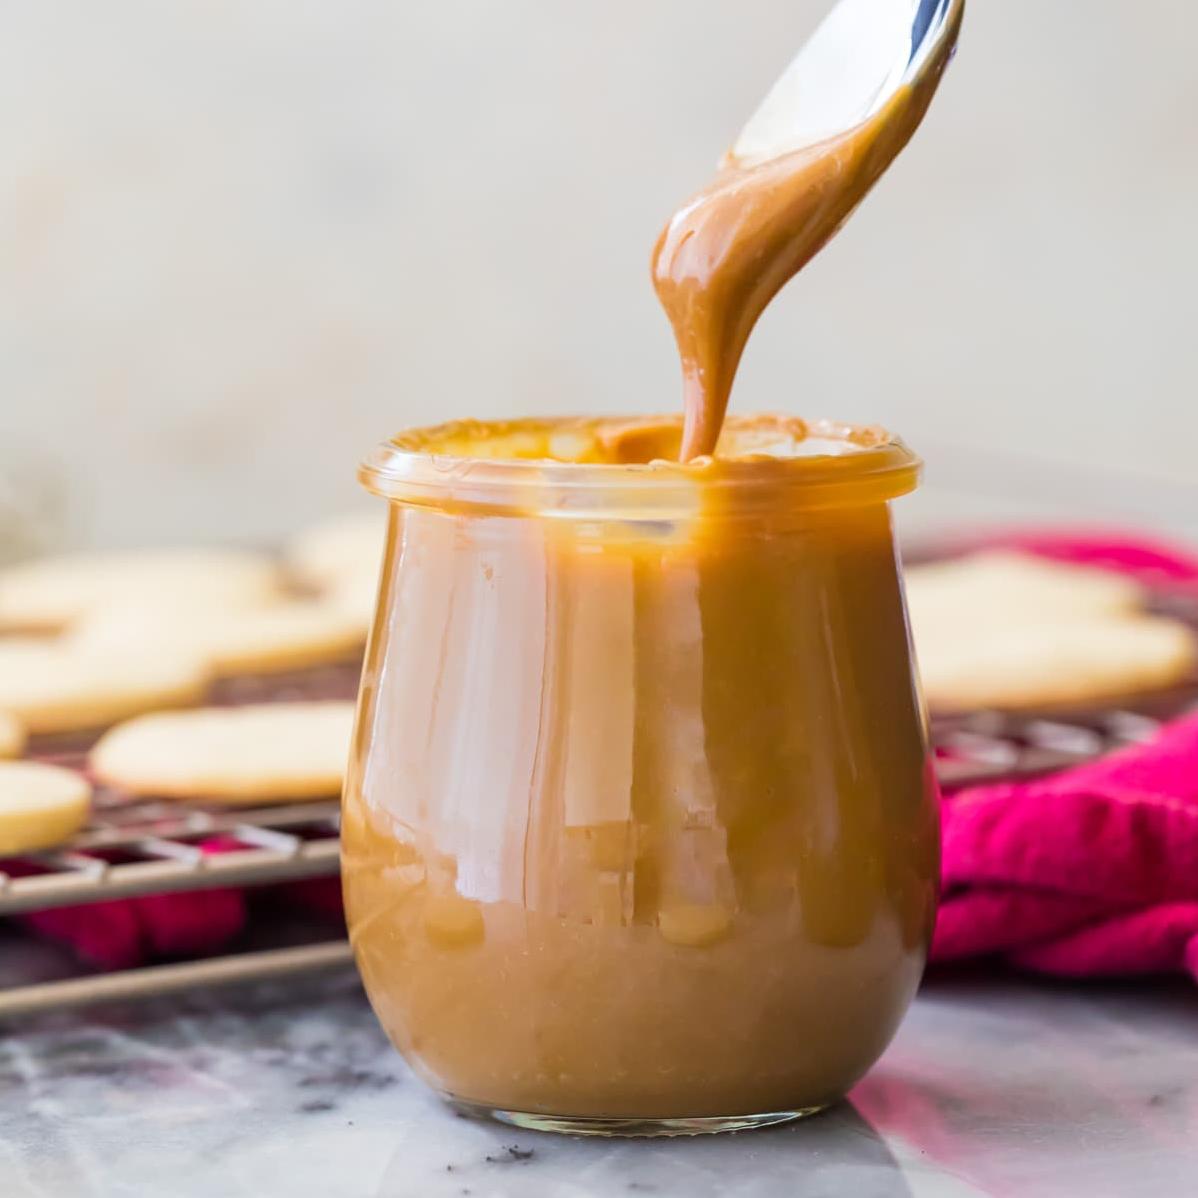  From milk to magic: watch as dulce de leche transforms before your eyes